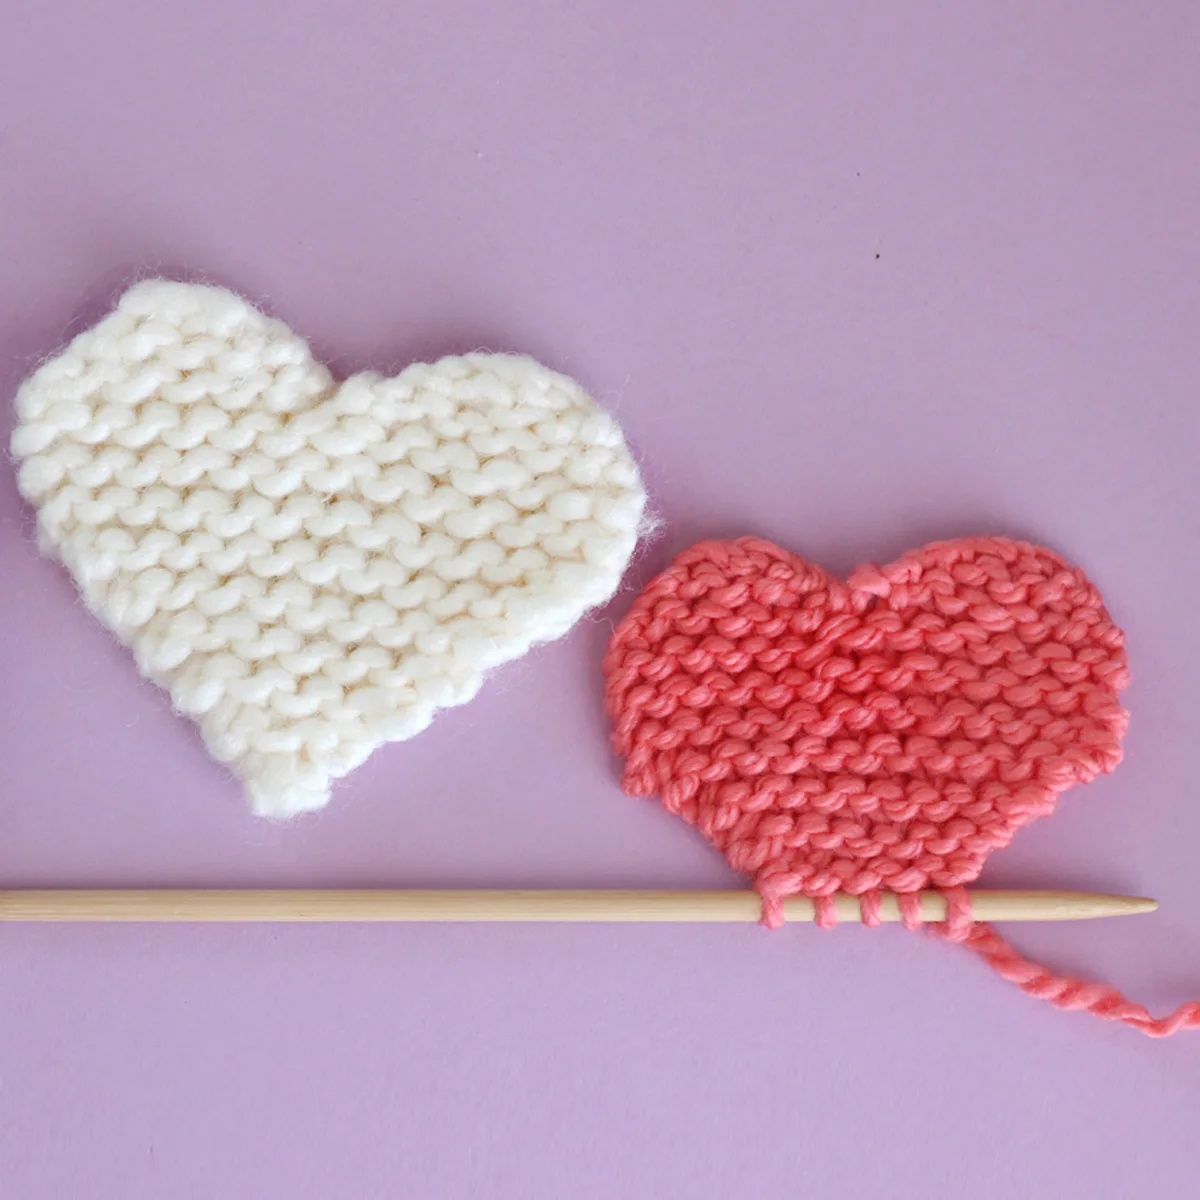 Knitted heart shapes in garter stitch pattern.